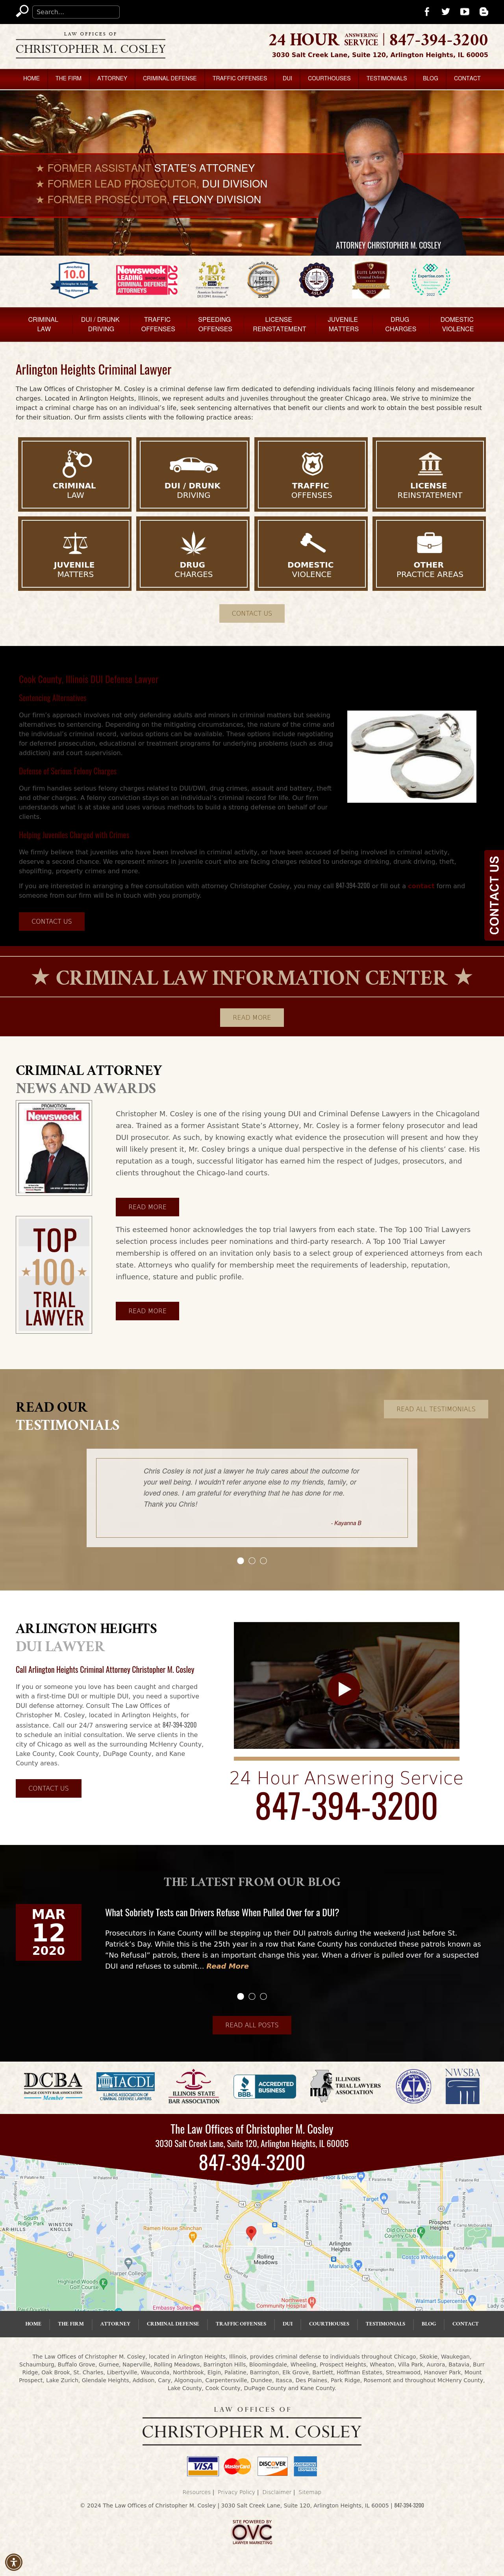 Christopher M Cosley - Chicago IL Lawyers